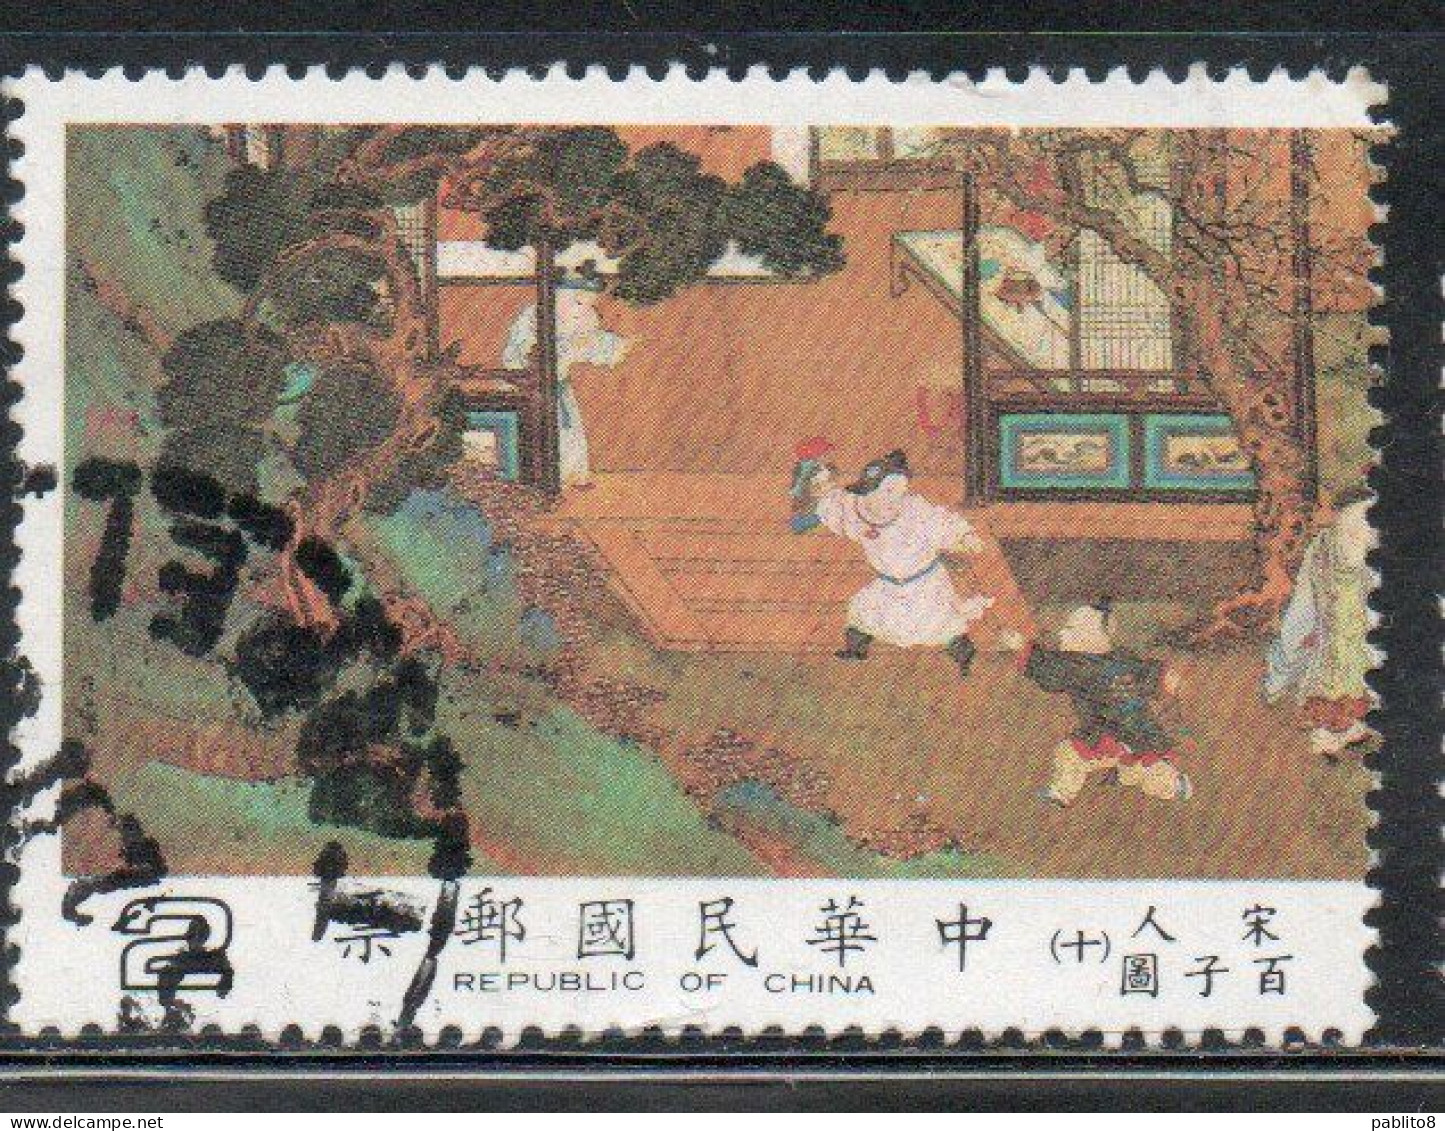 CHINA REPUBLIC CINA TAIWAN FORMOSA 1981 BOYS PLAYING GAMES 2$ USED USATO OBLITERE' - Gebraucht